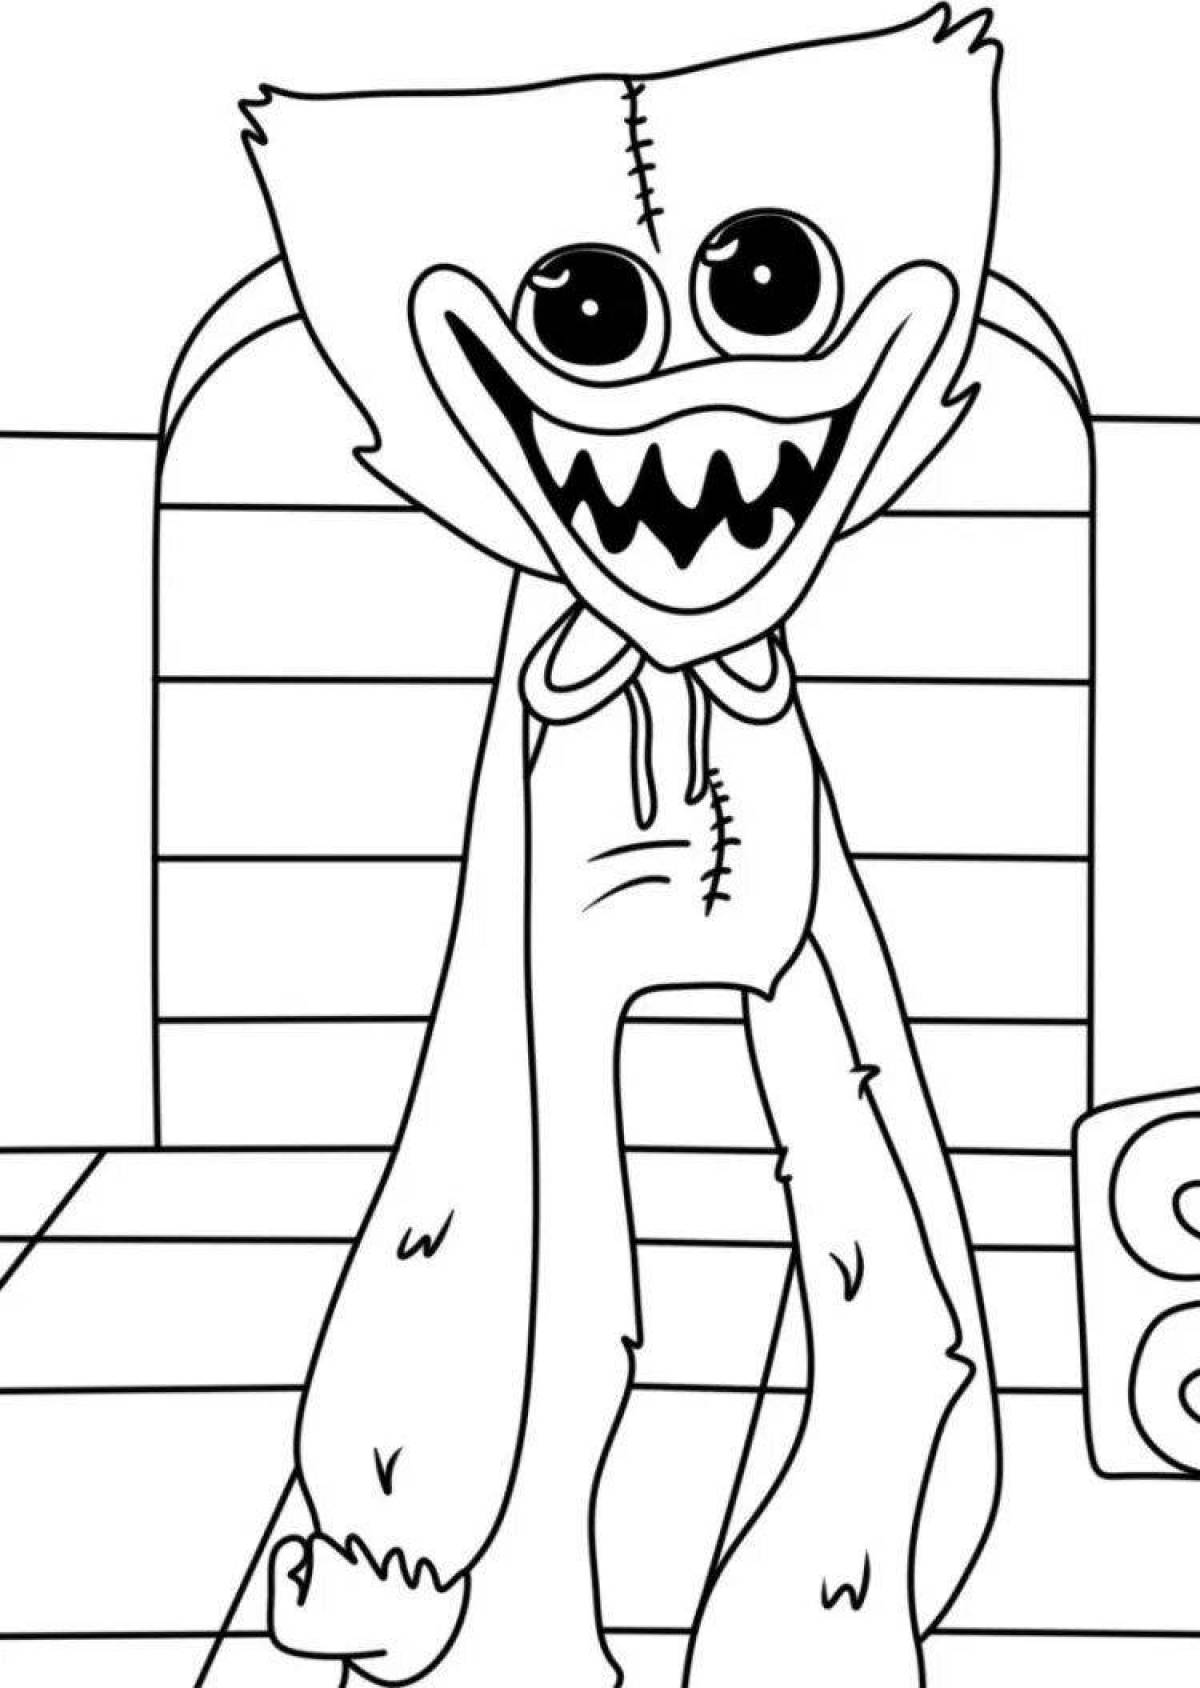 Glorious Poppy Playtime coloring page